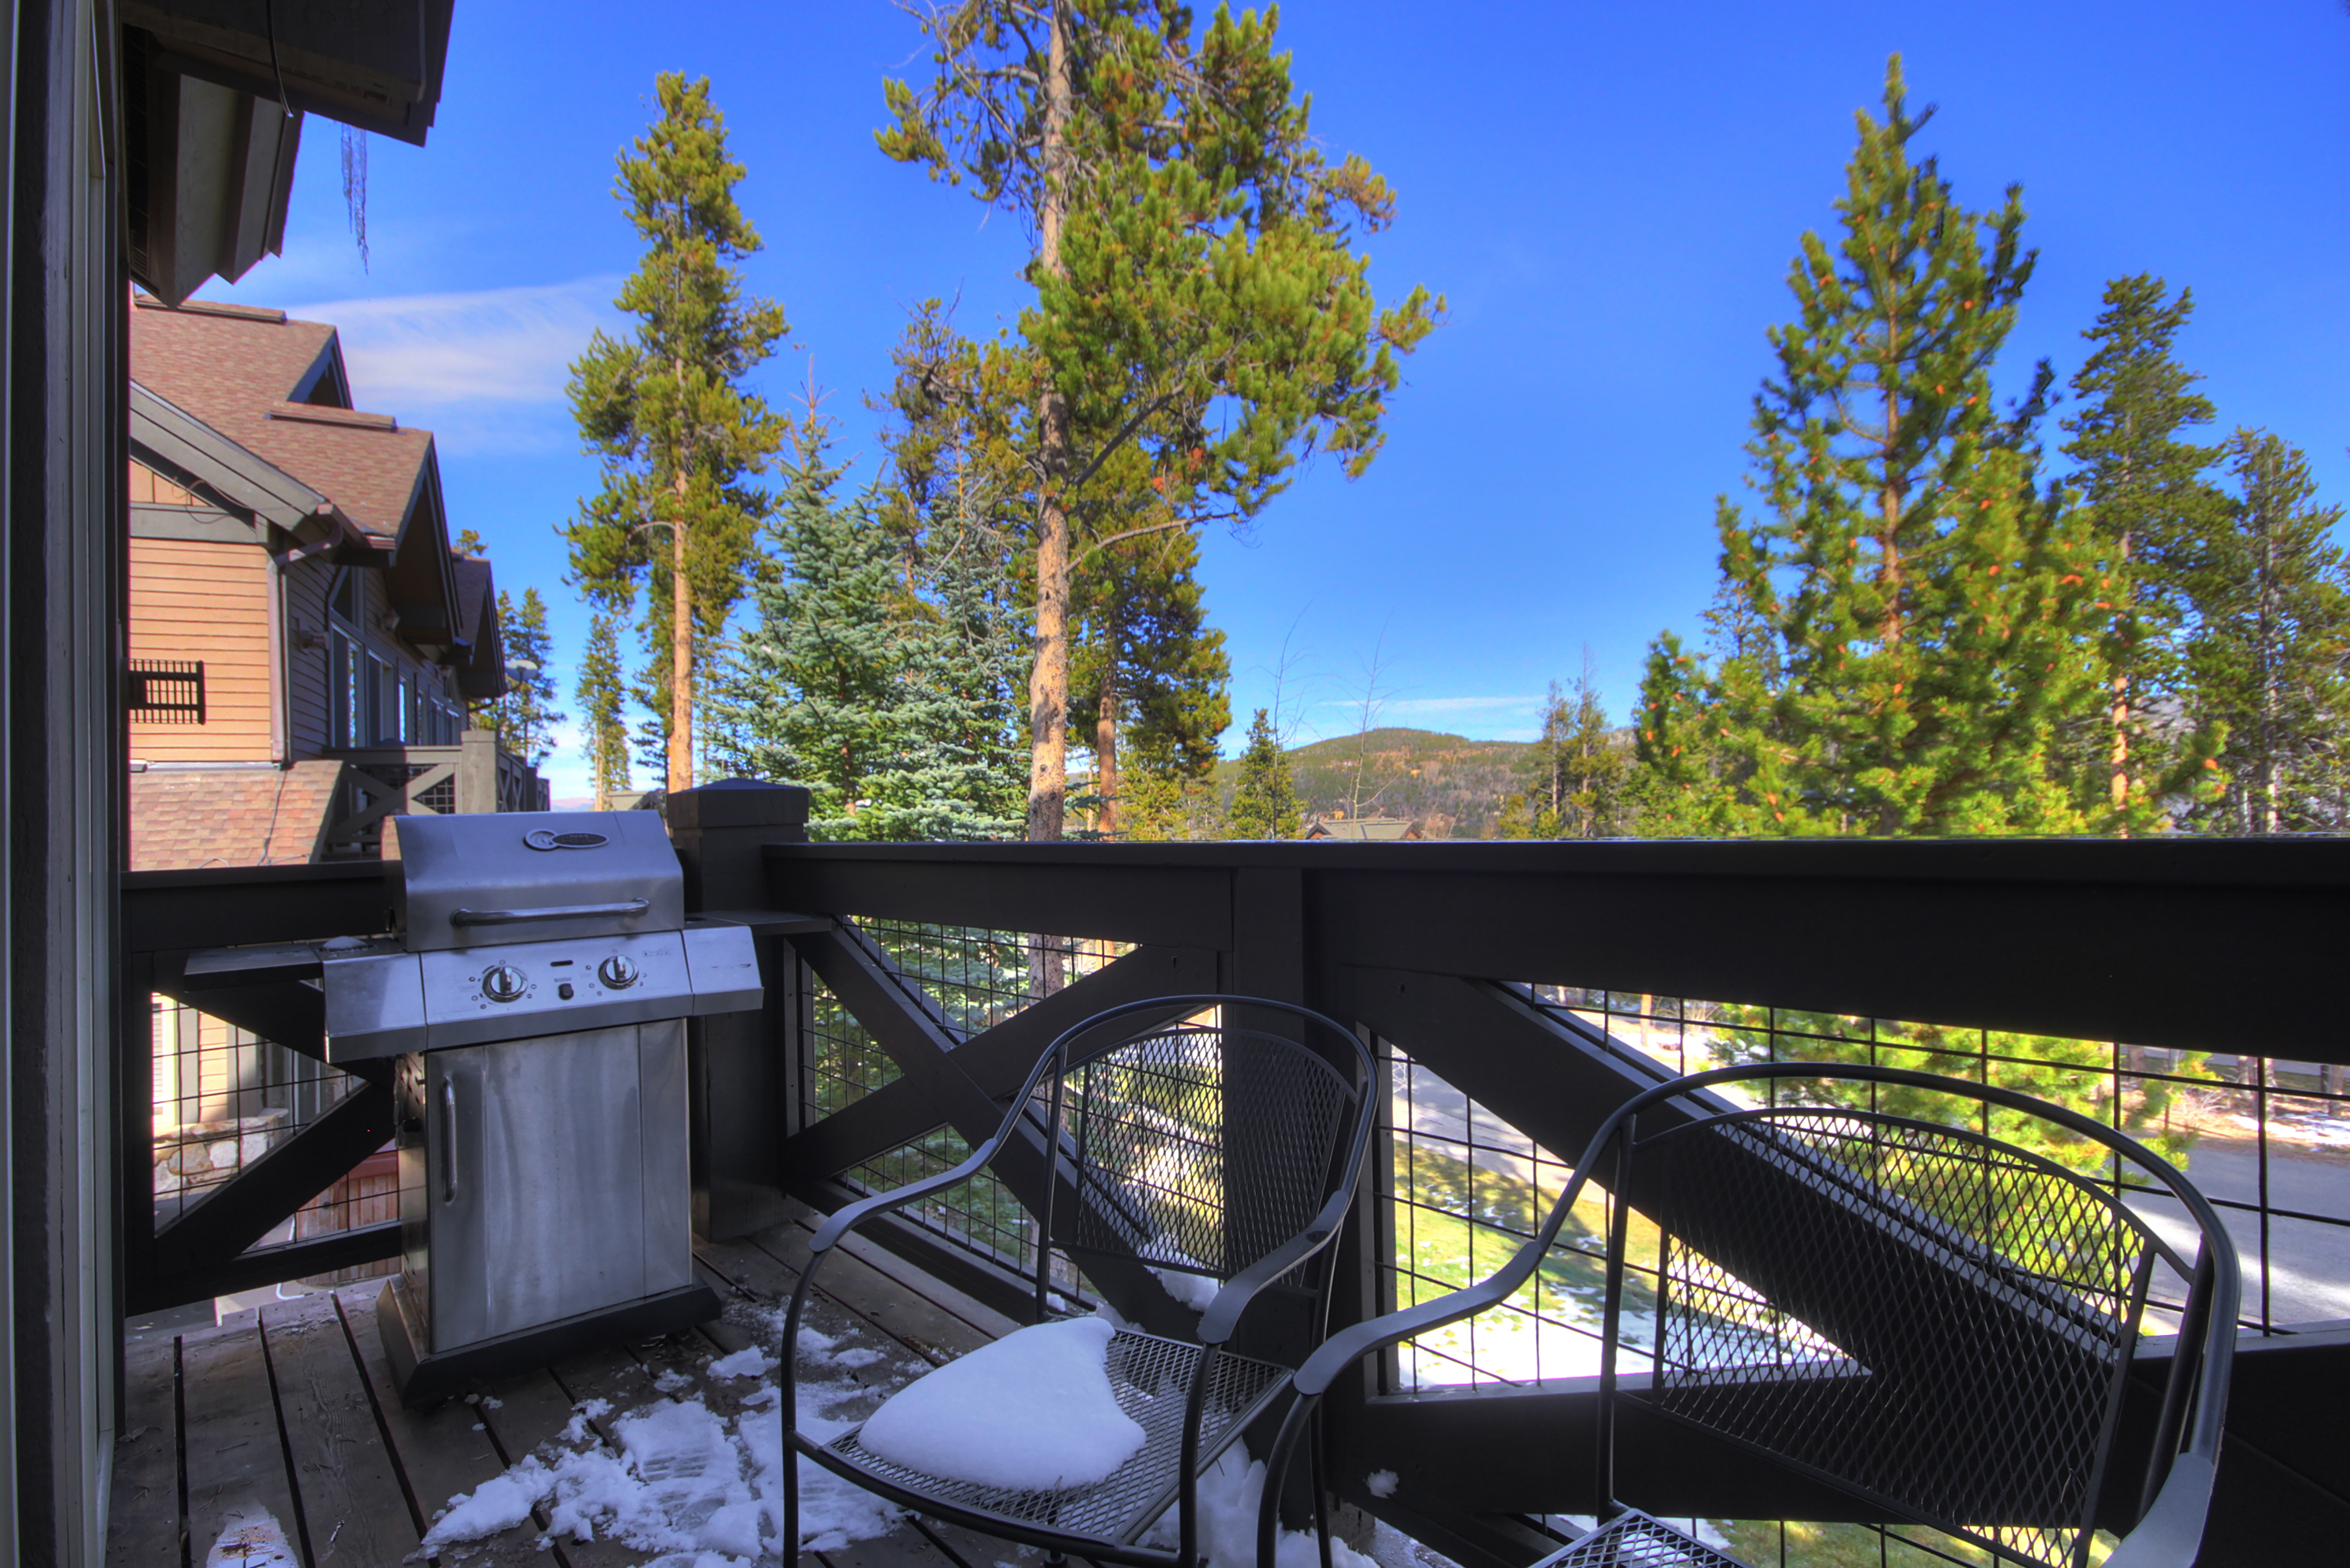 Grill some delicious burgers and hotdogs on a beautiful summer night - Amber Sky Breckenridge Vacation Rental